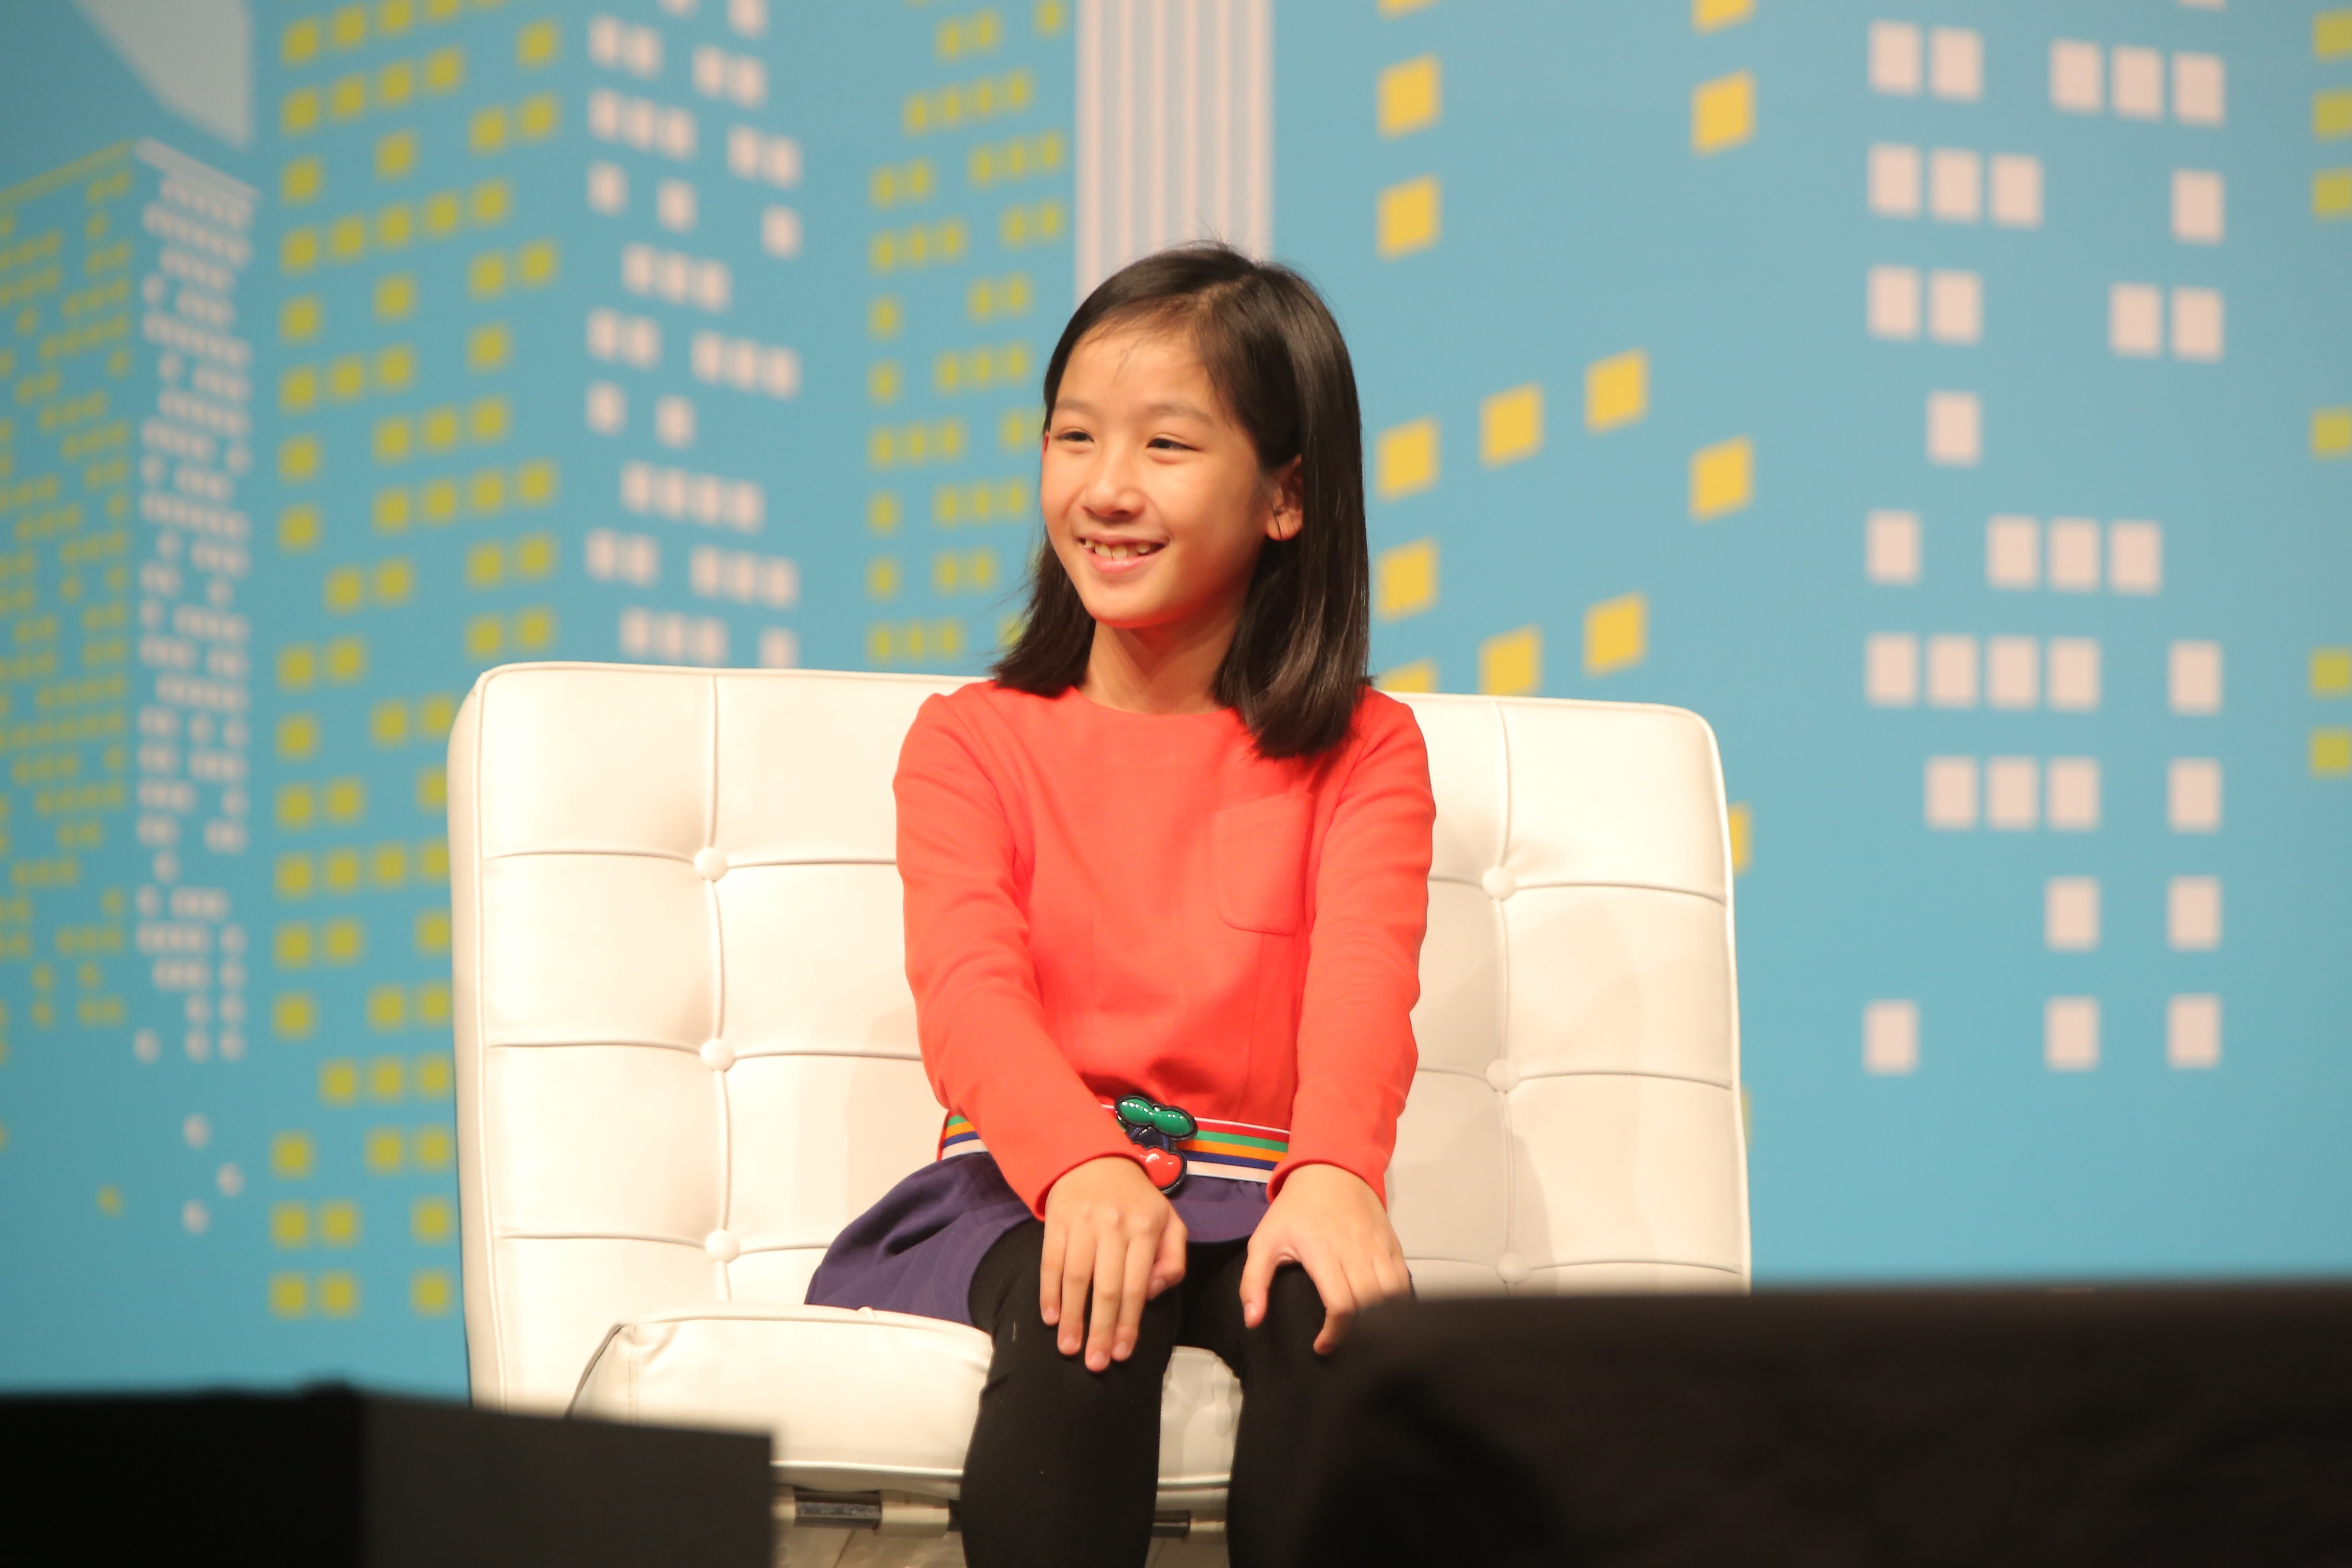 The tech-savvy girl launched her language learning application MinorMynas at age 10 after struggling with Mandarin lessons